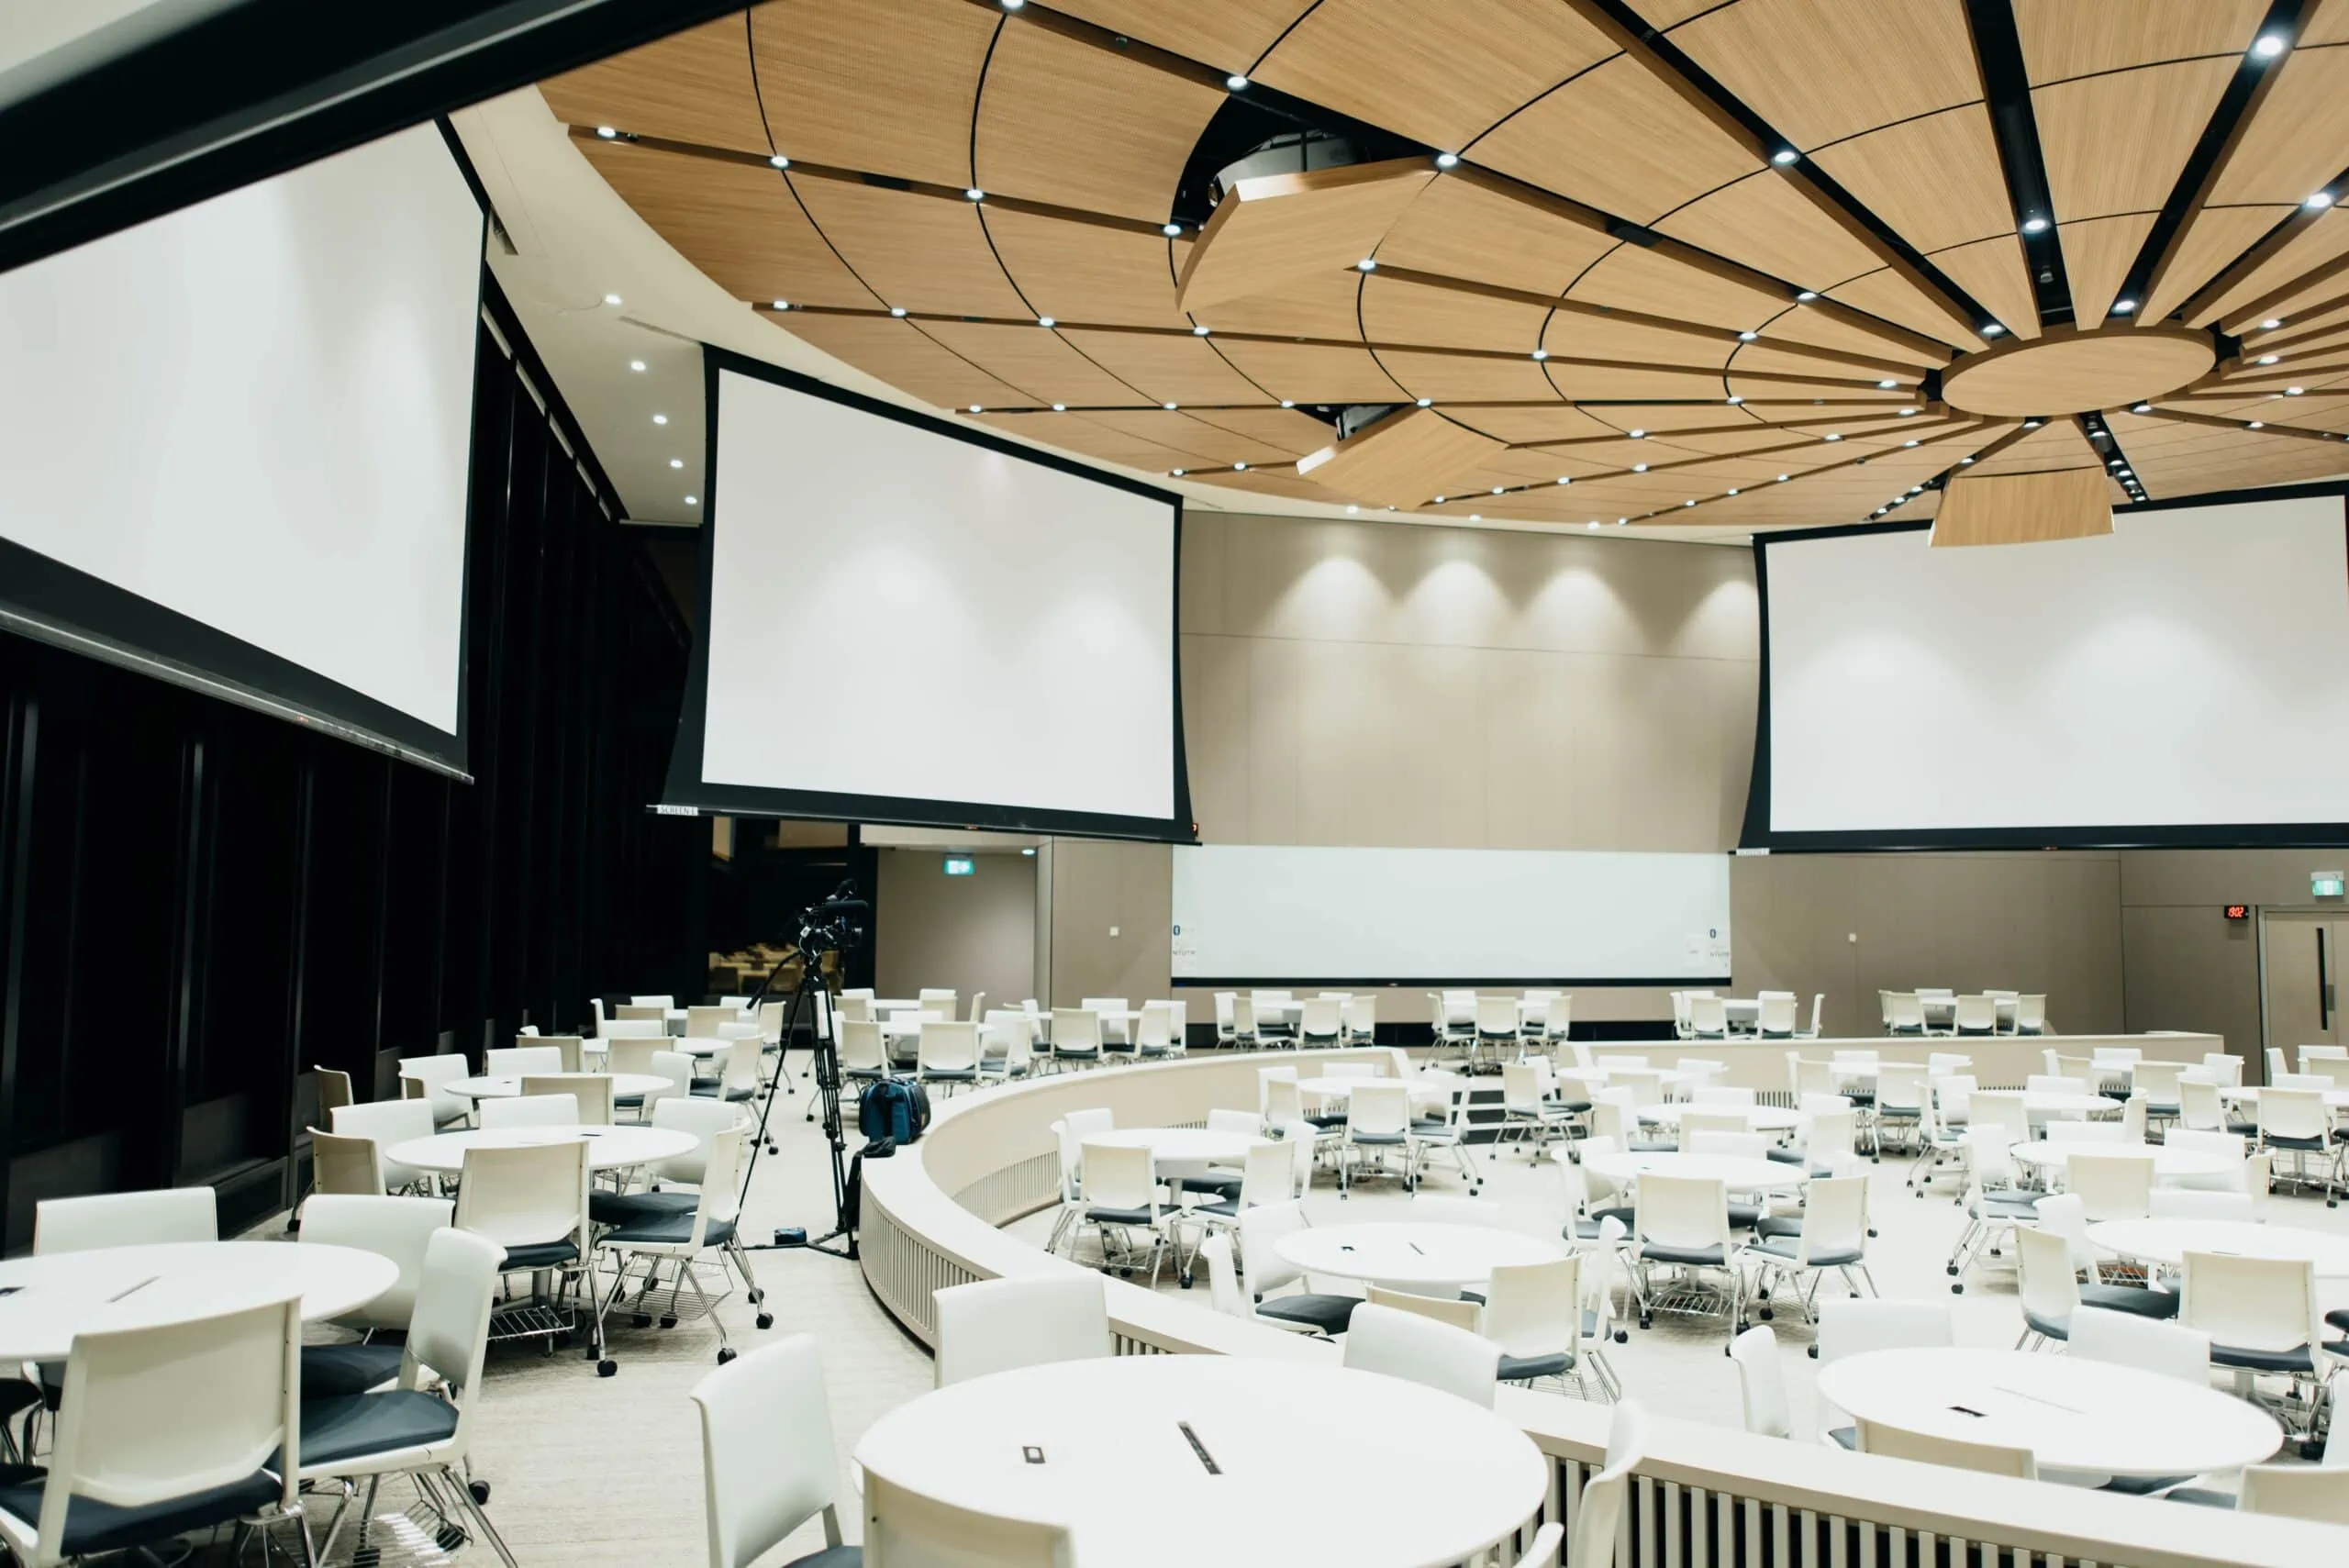 Event space protected by event cameras